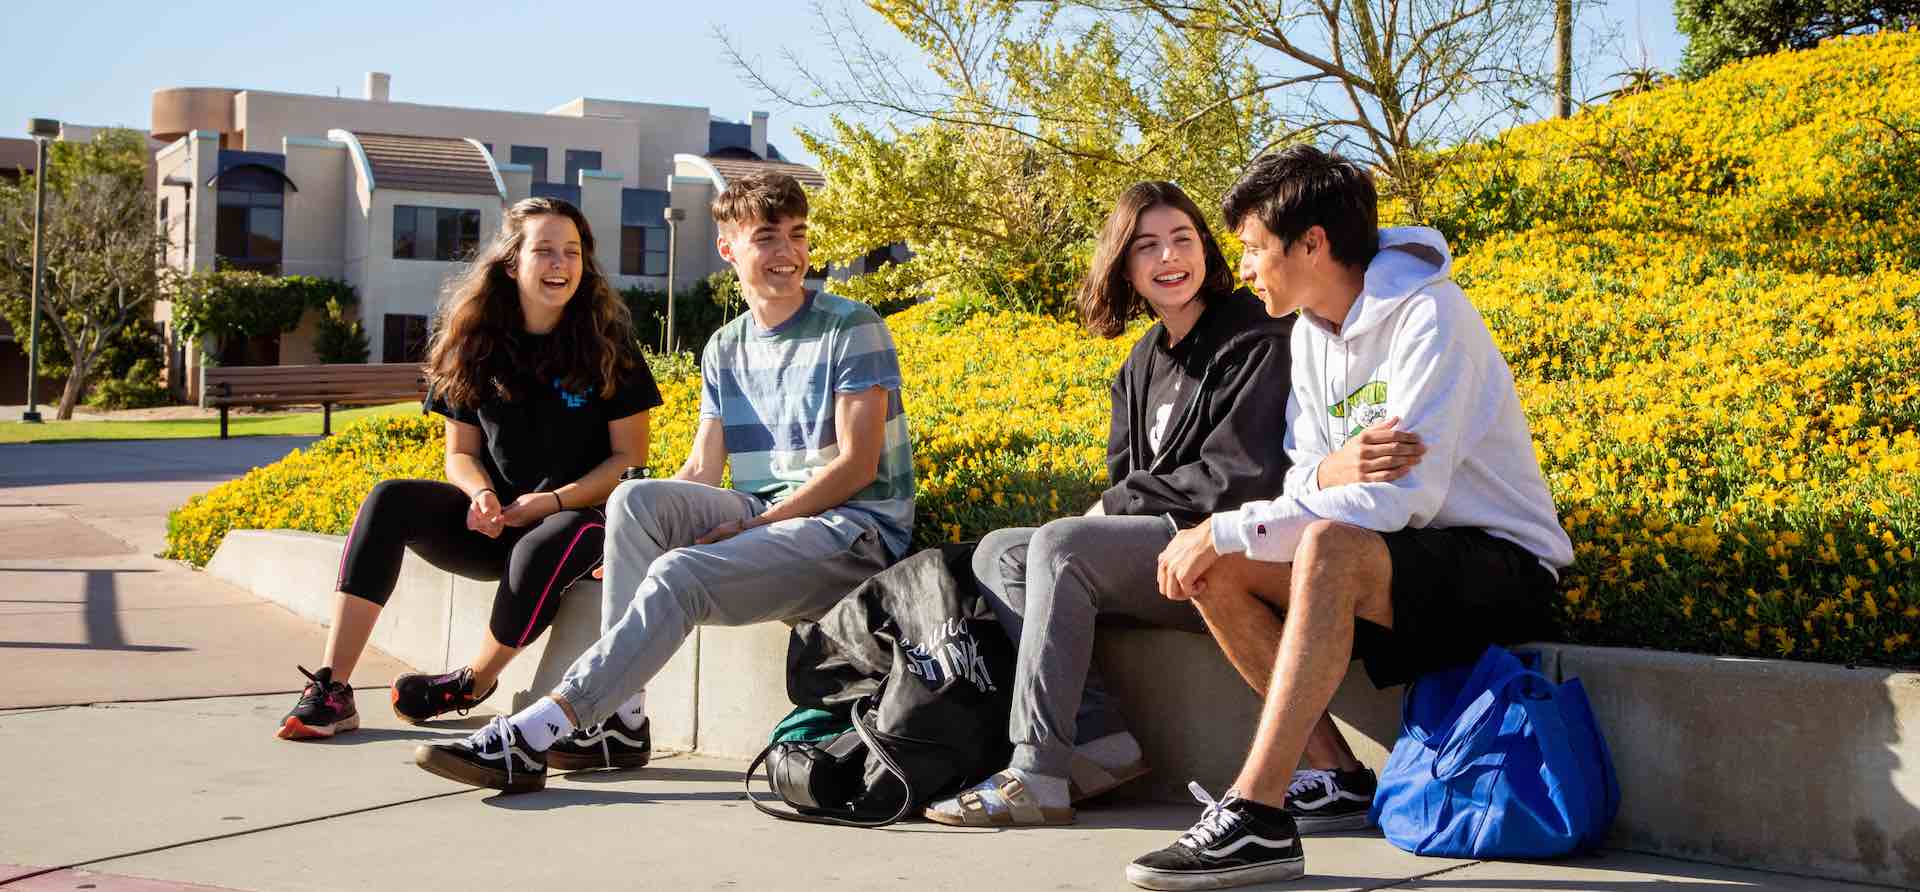 four students sitting outdoors smiling and interacting